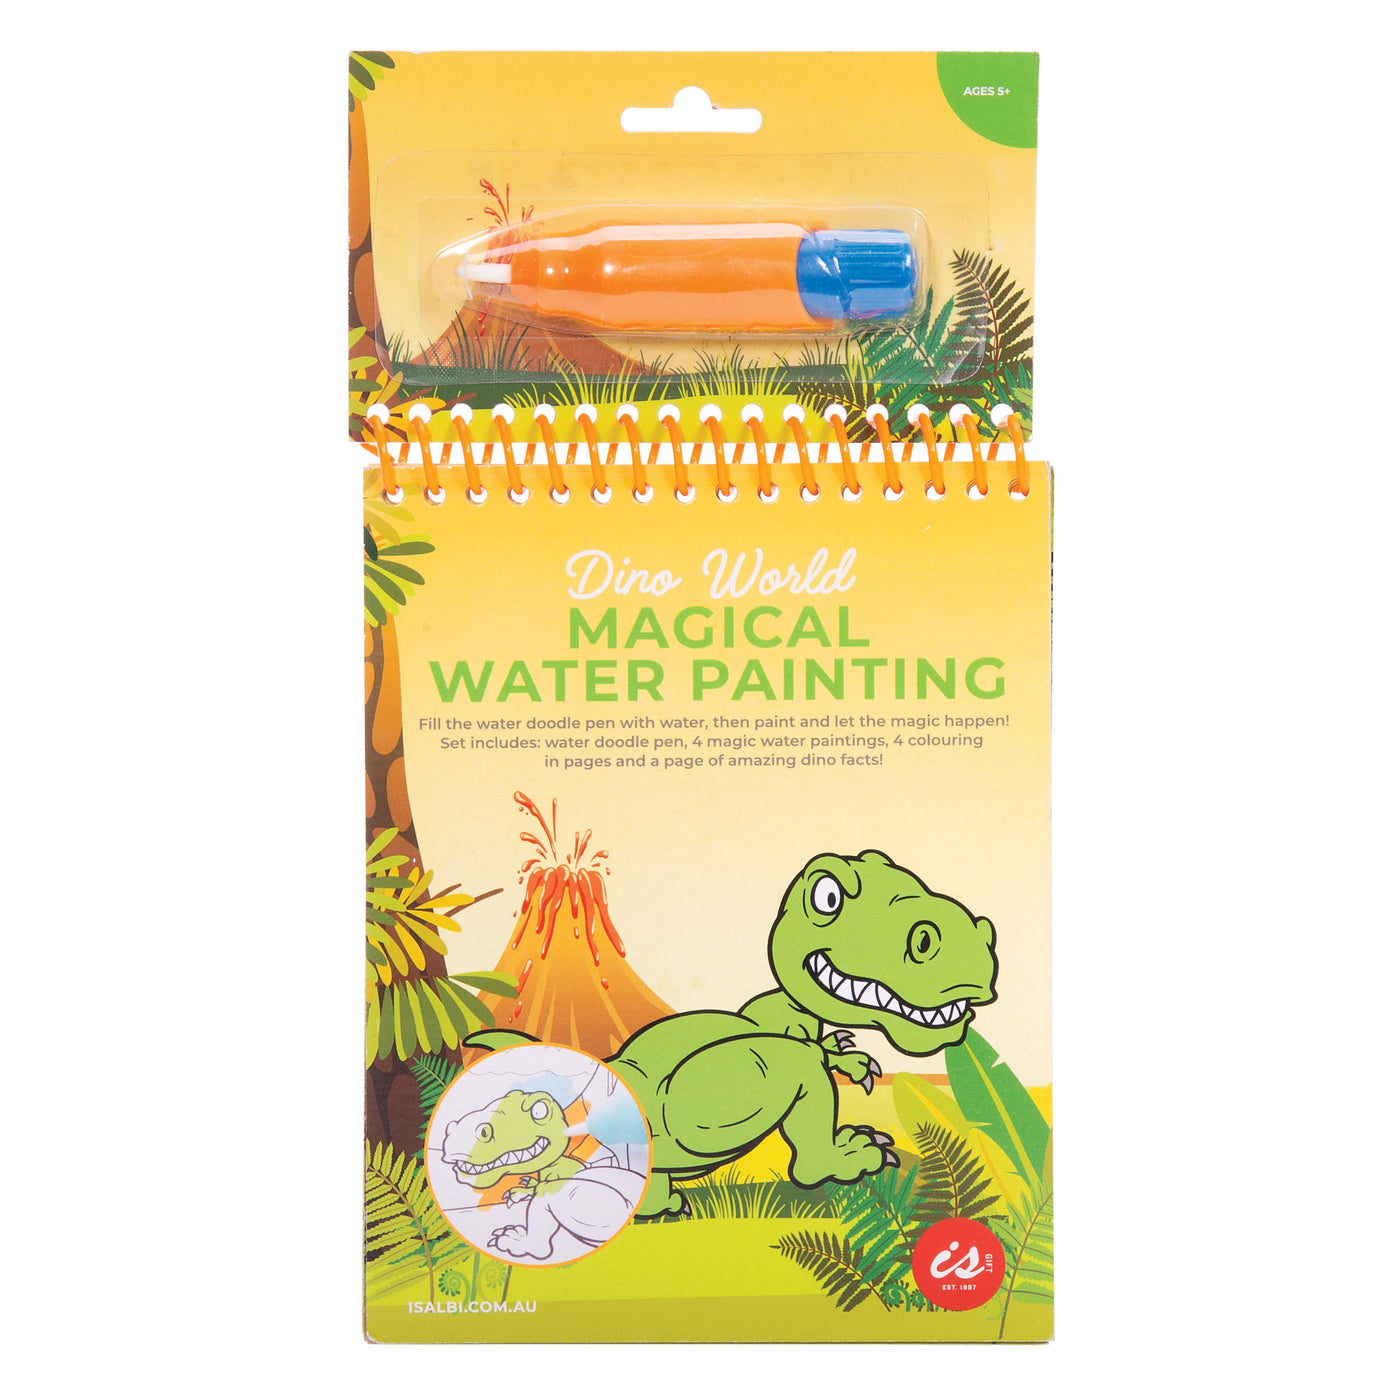 Magical Water Painting - Dino World